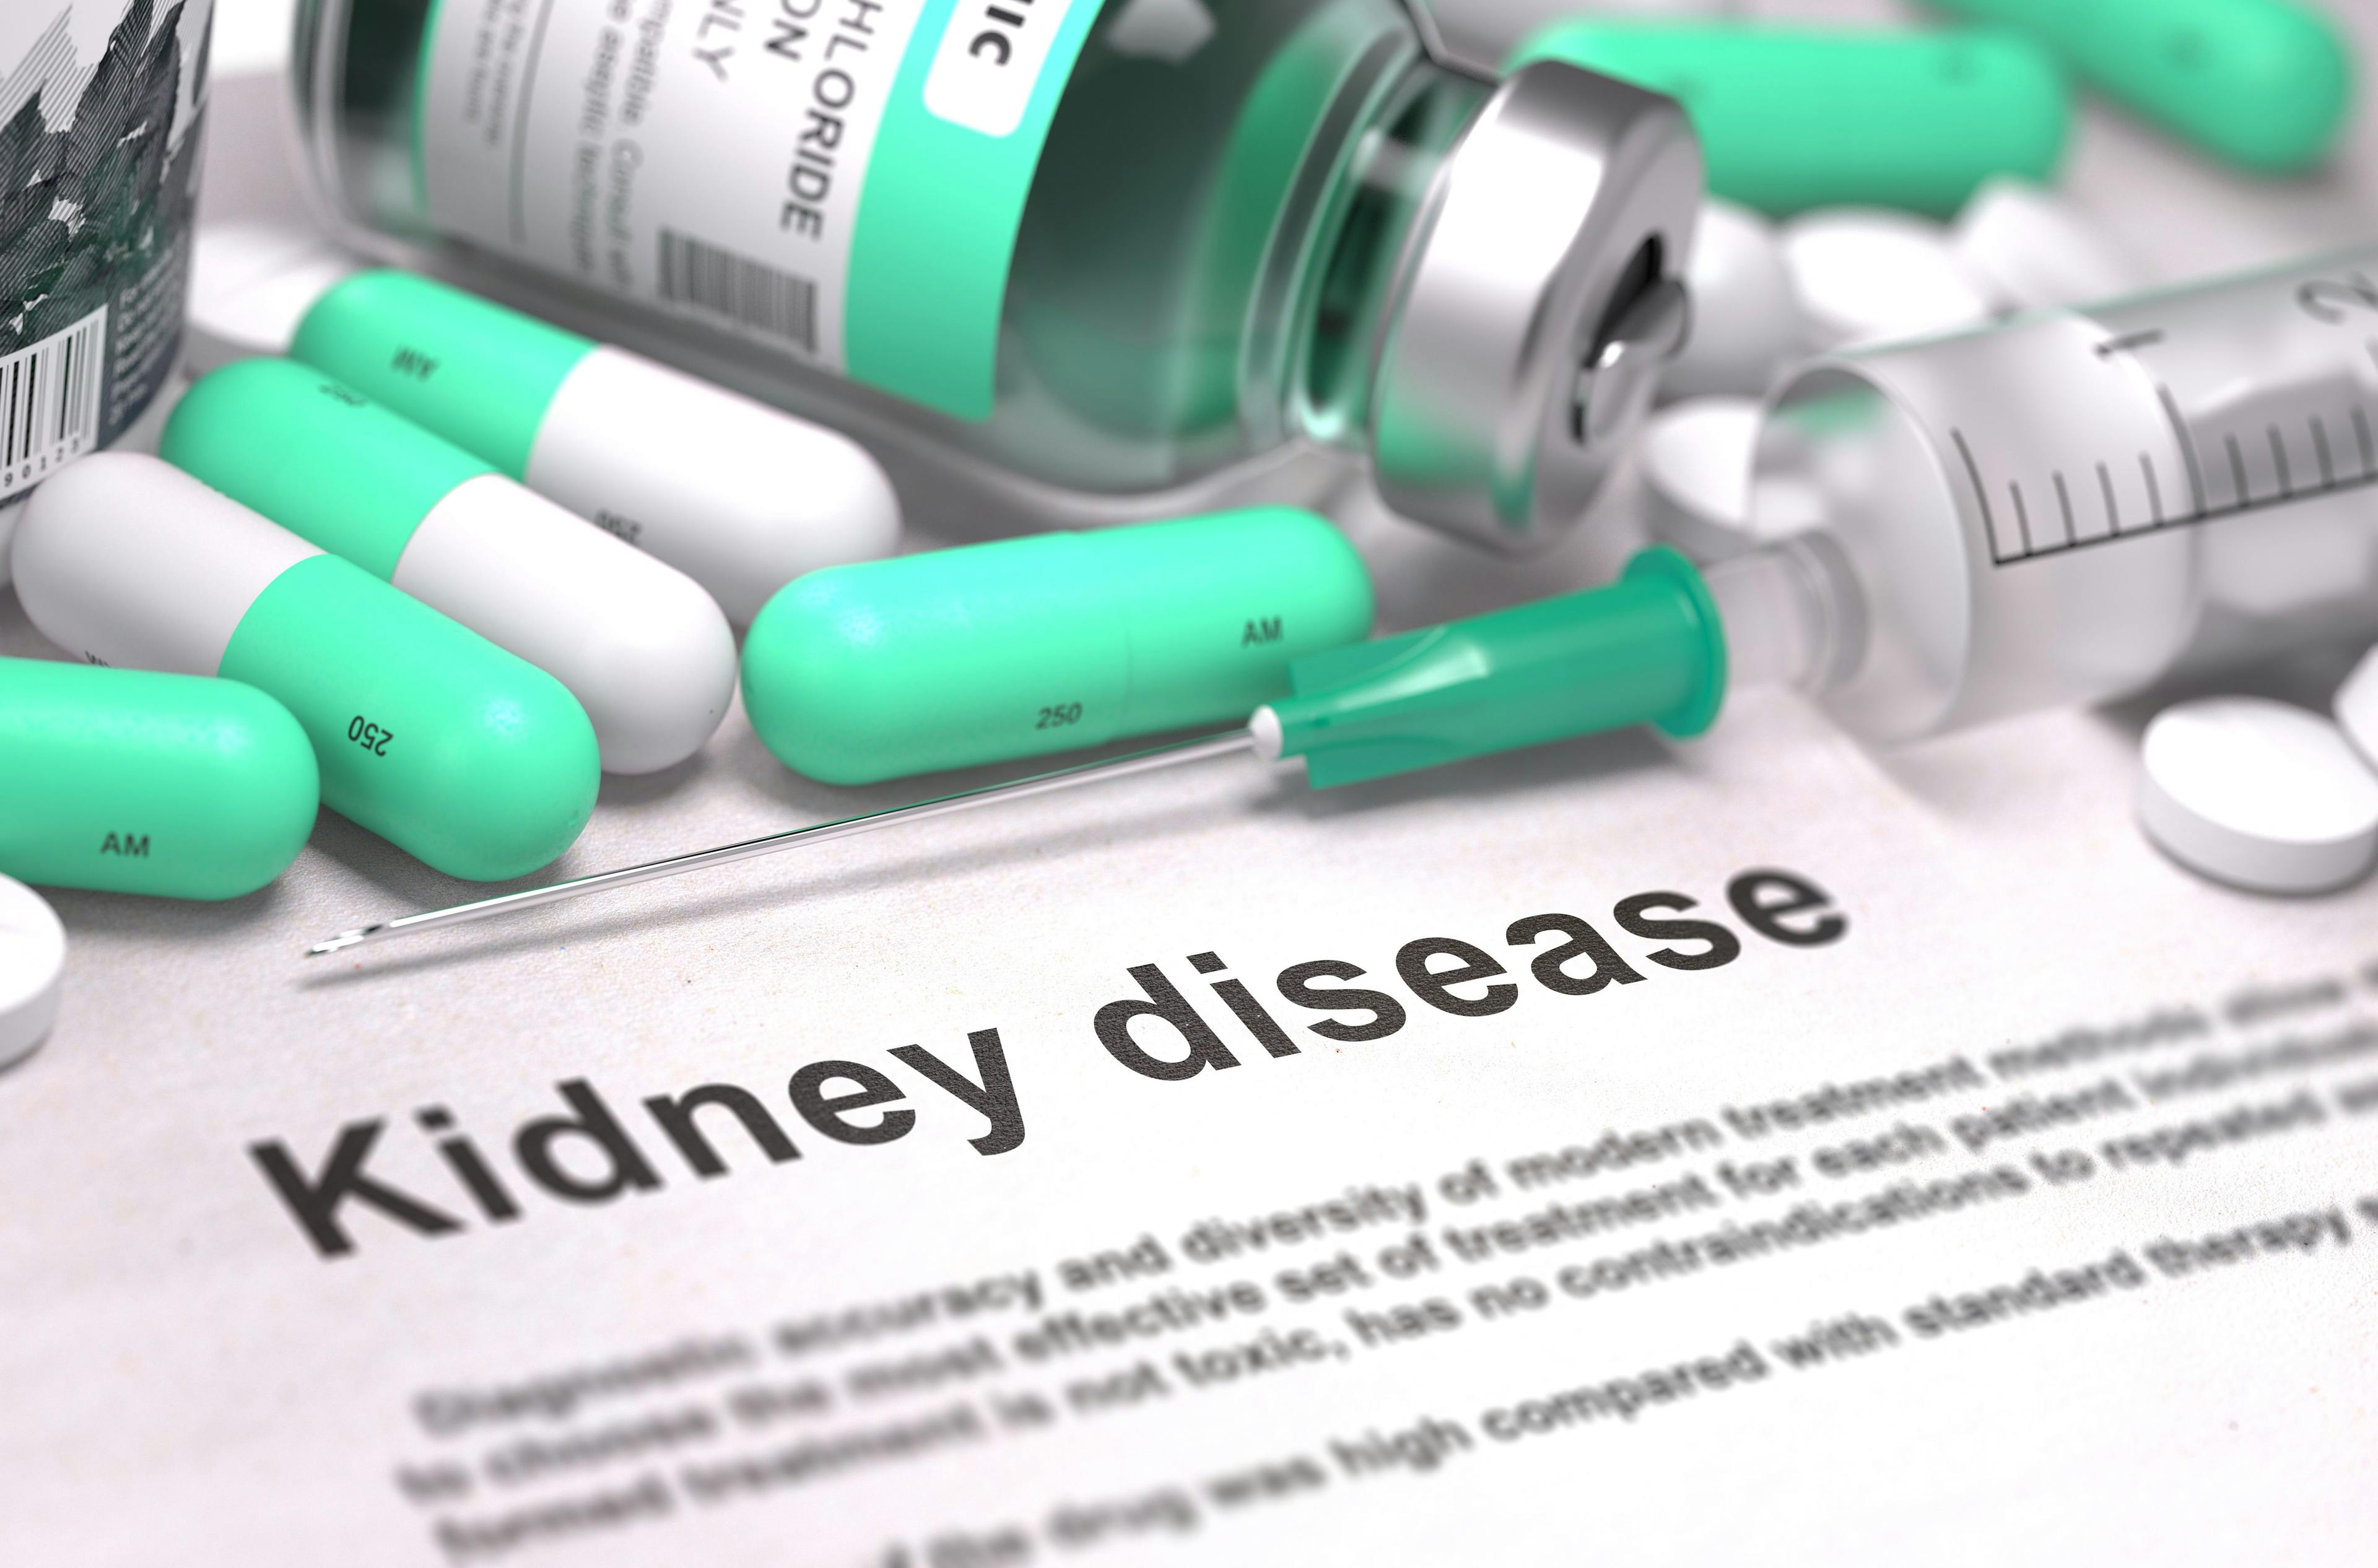 Text on a page that says "kidney disease" surrounded by medications.